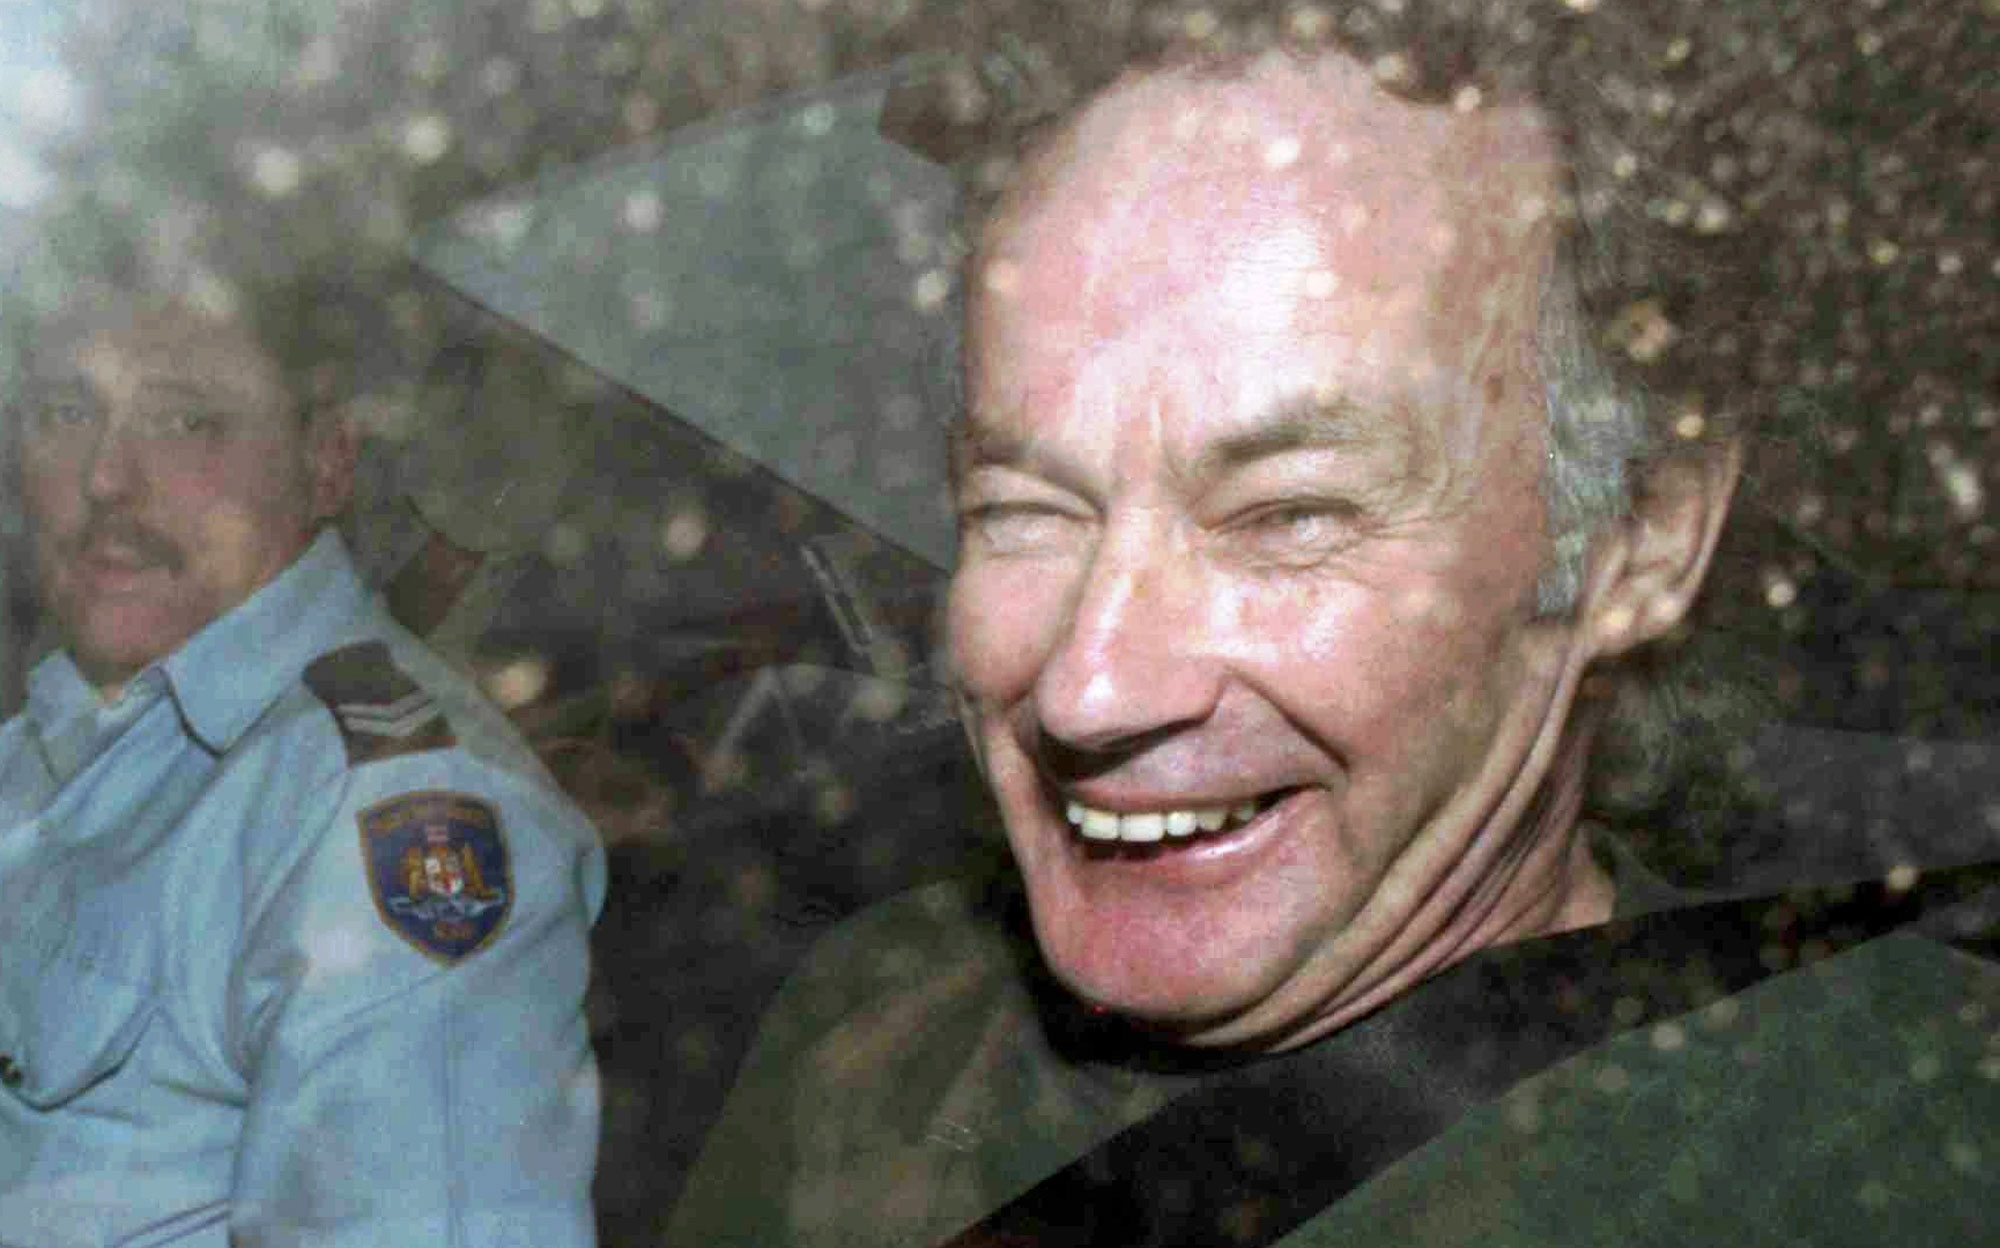 Notorious Serial Killer Ivan Milat Has Died Aged 74, Of Course Giving No Deathbed Confession